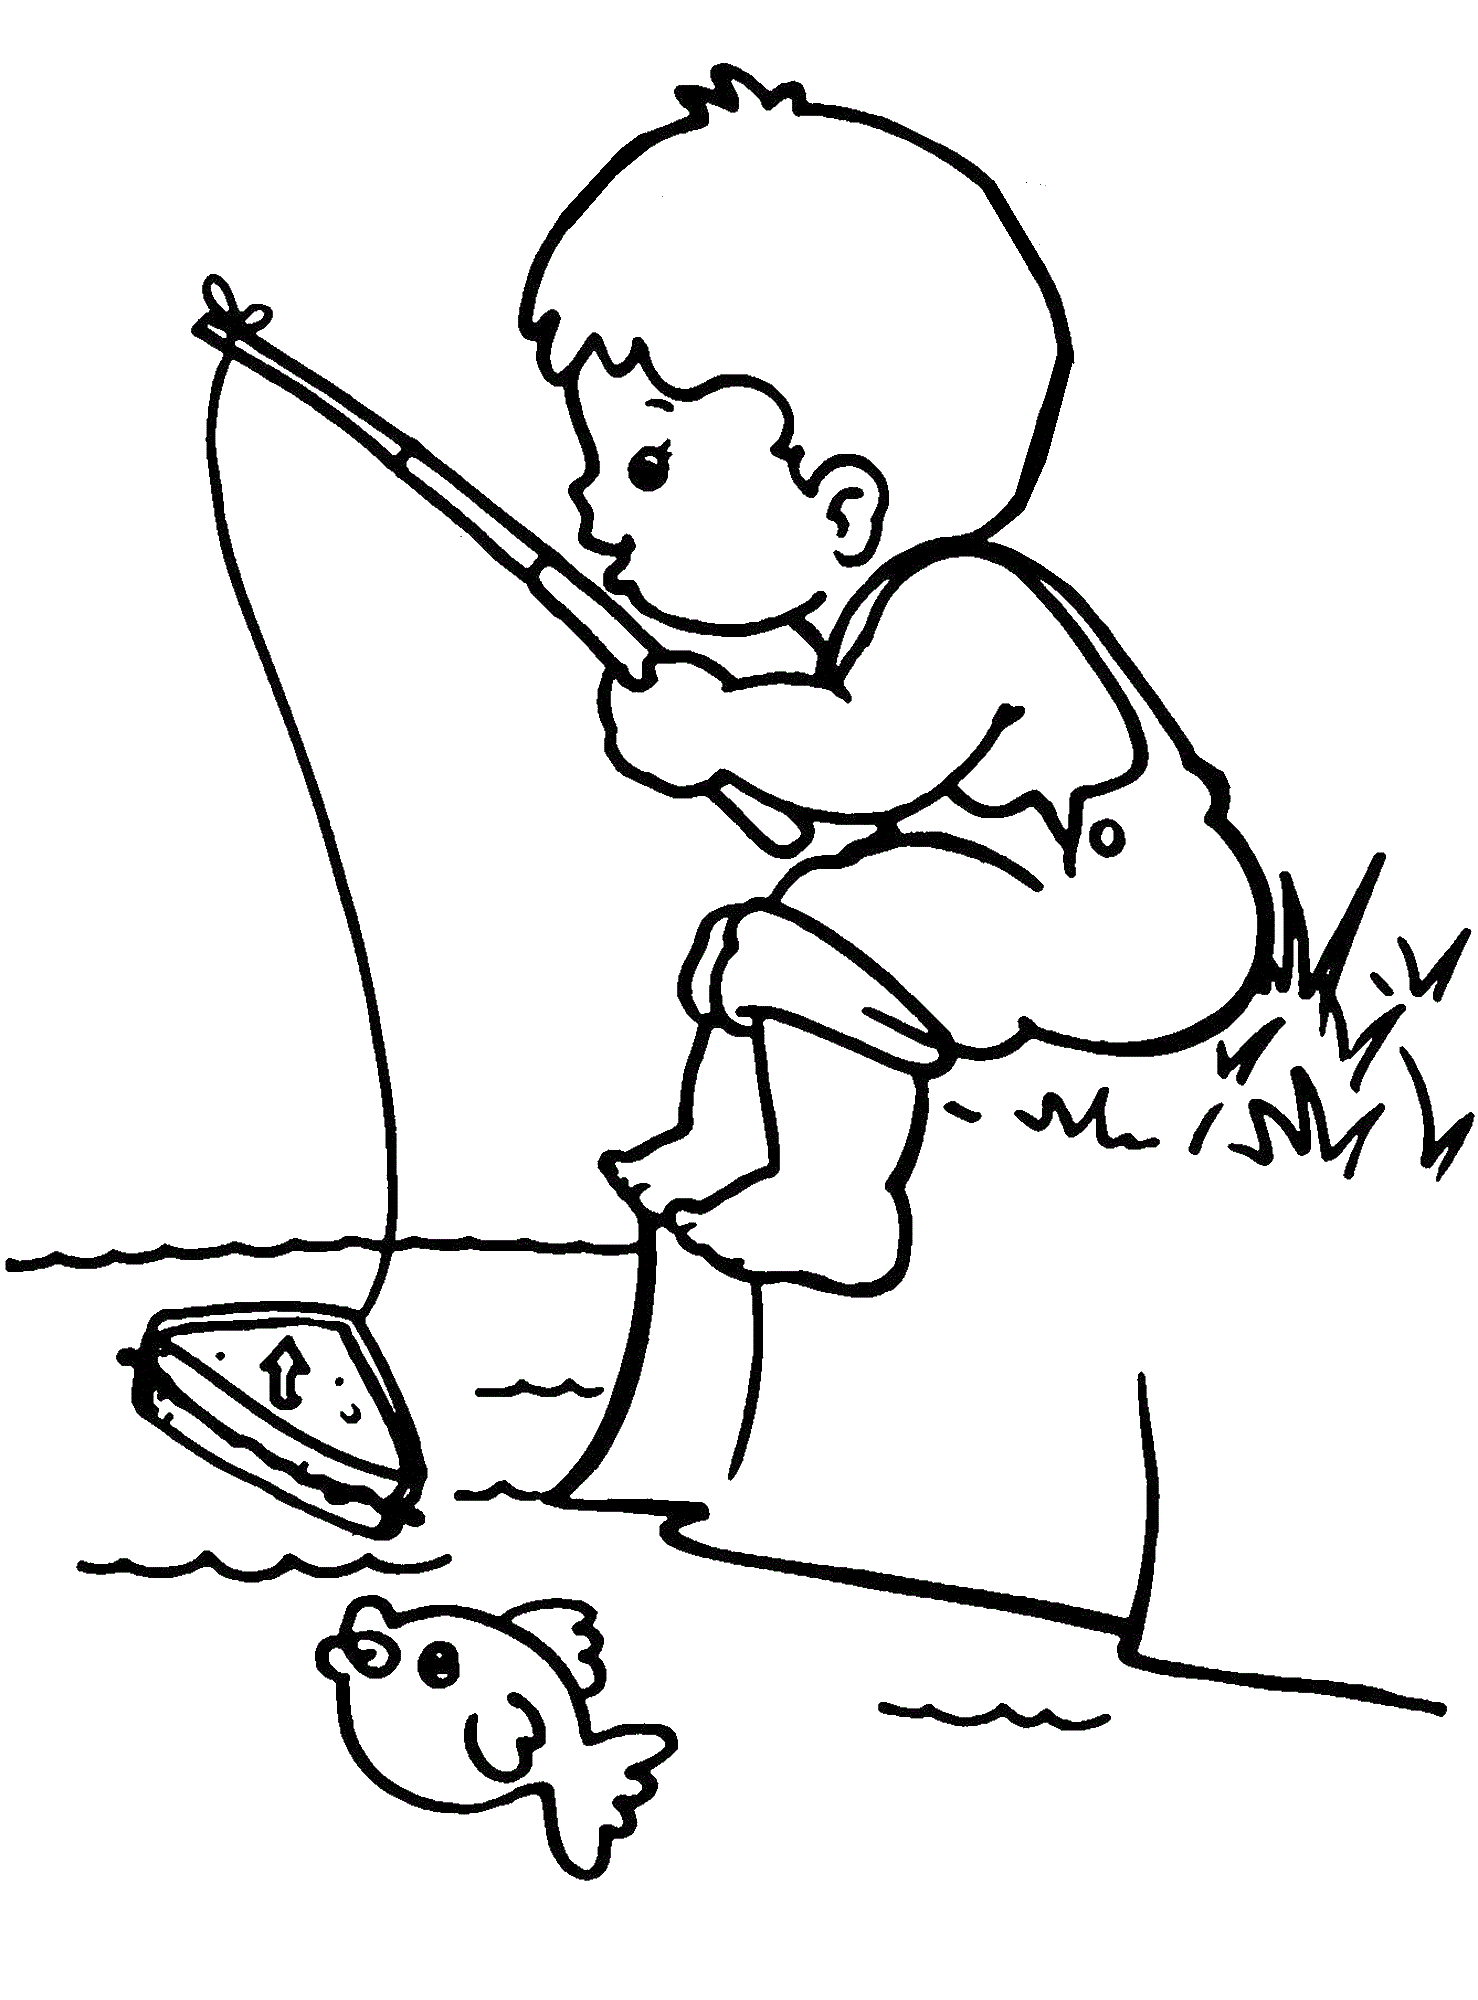 Coloring Pages Fishing Fishing Coloring Pages Best Coloring Pages For Kids